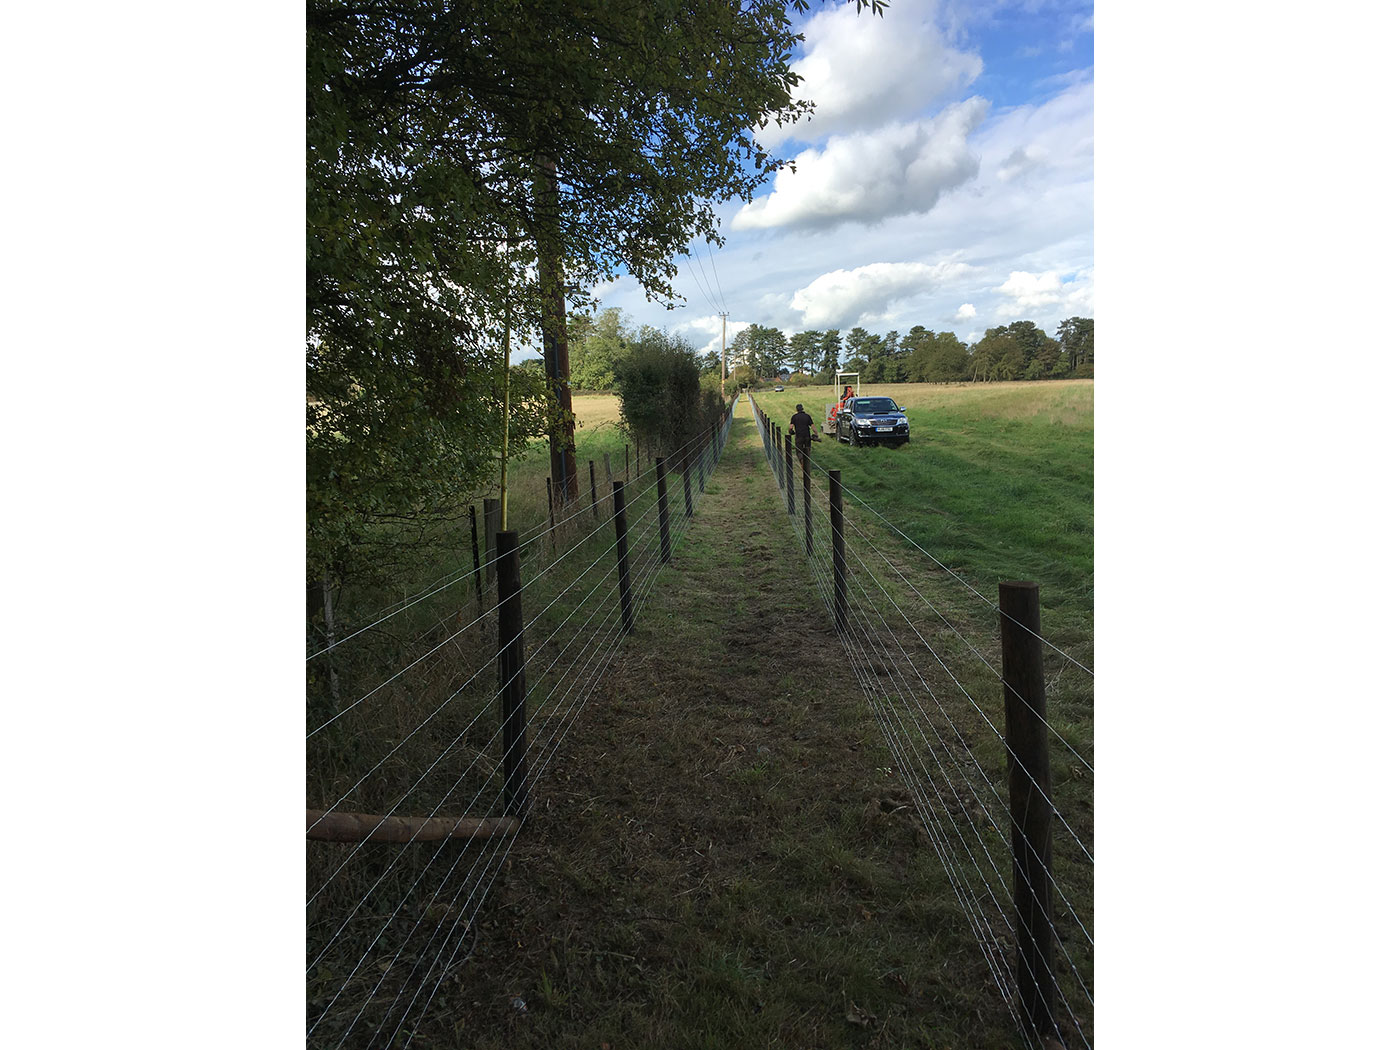 Stock netting on posts by Vincent Fencing